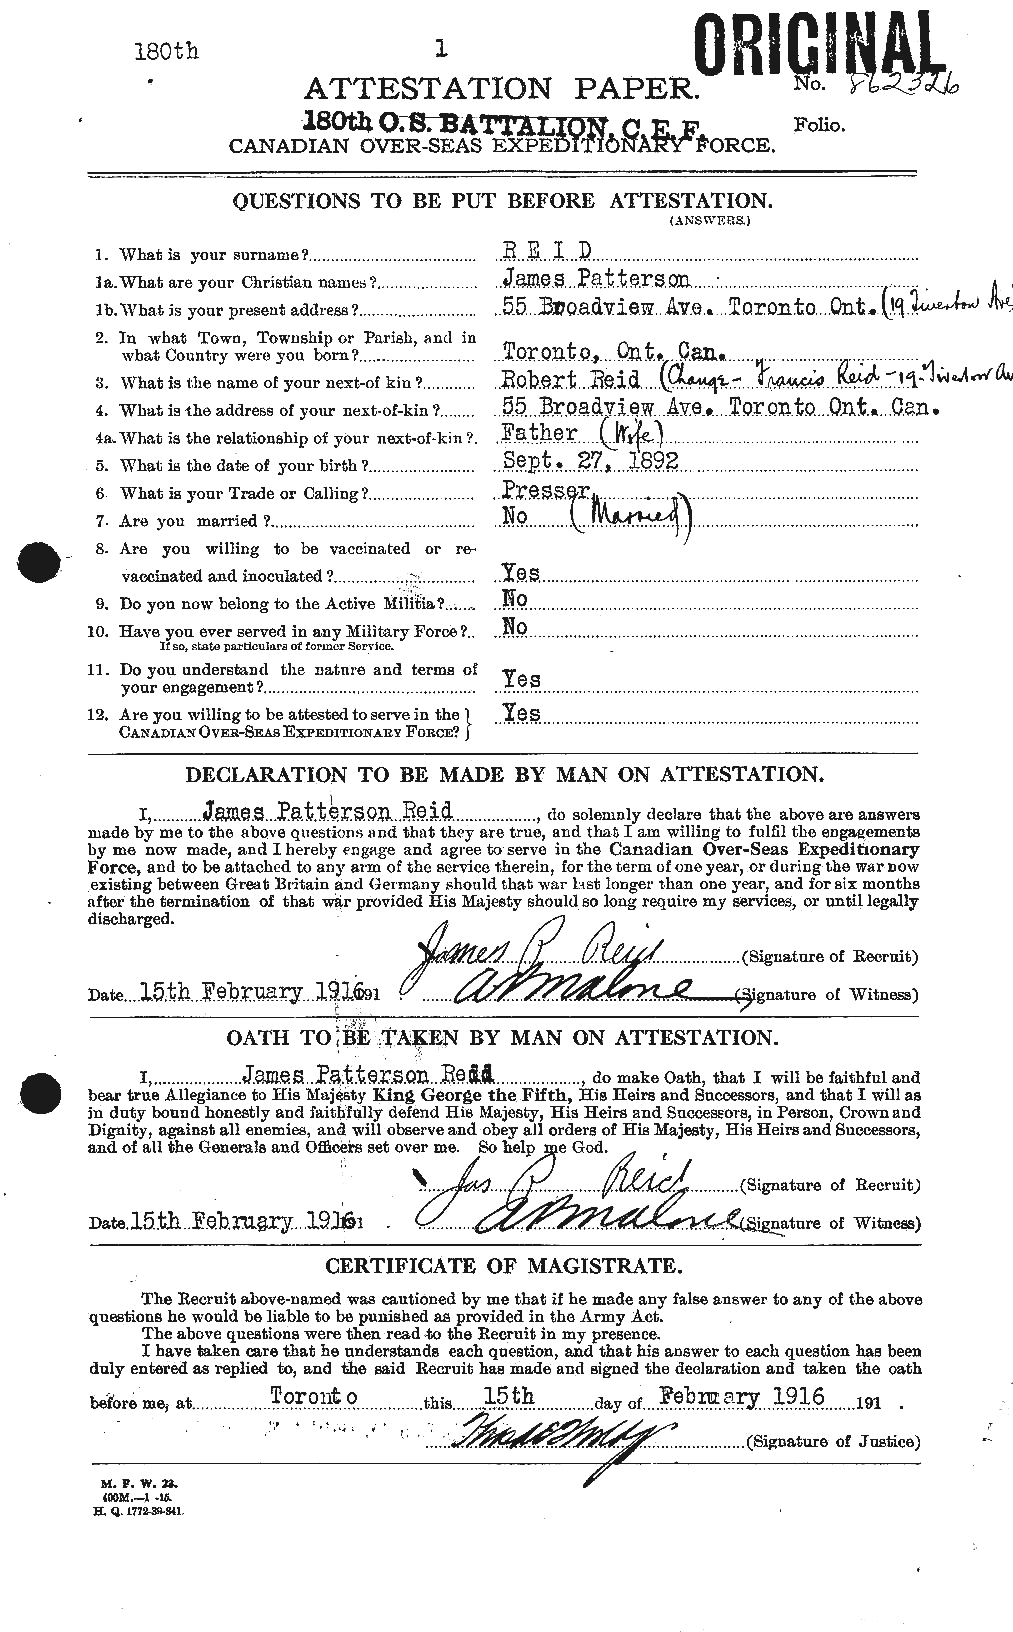 Personnel Records of the First World War - CEF 598732a